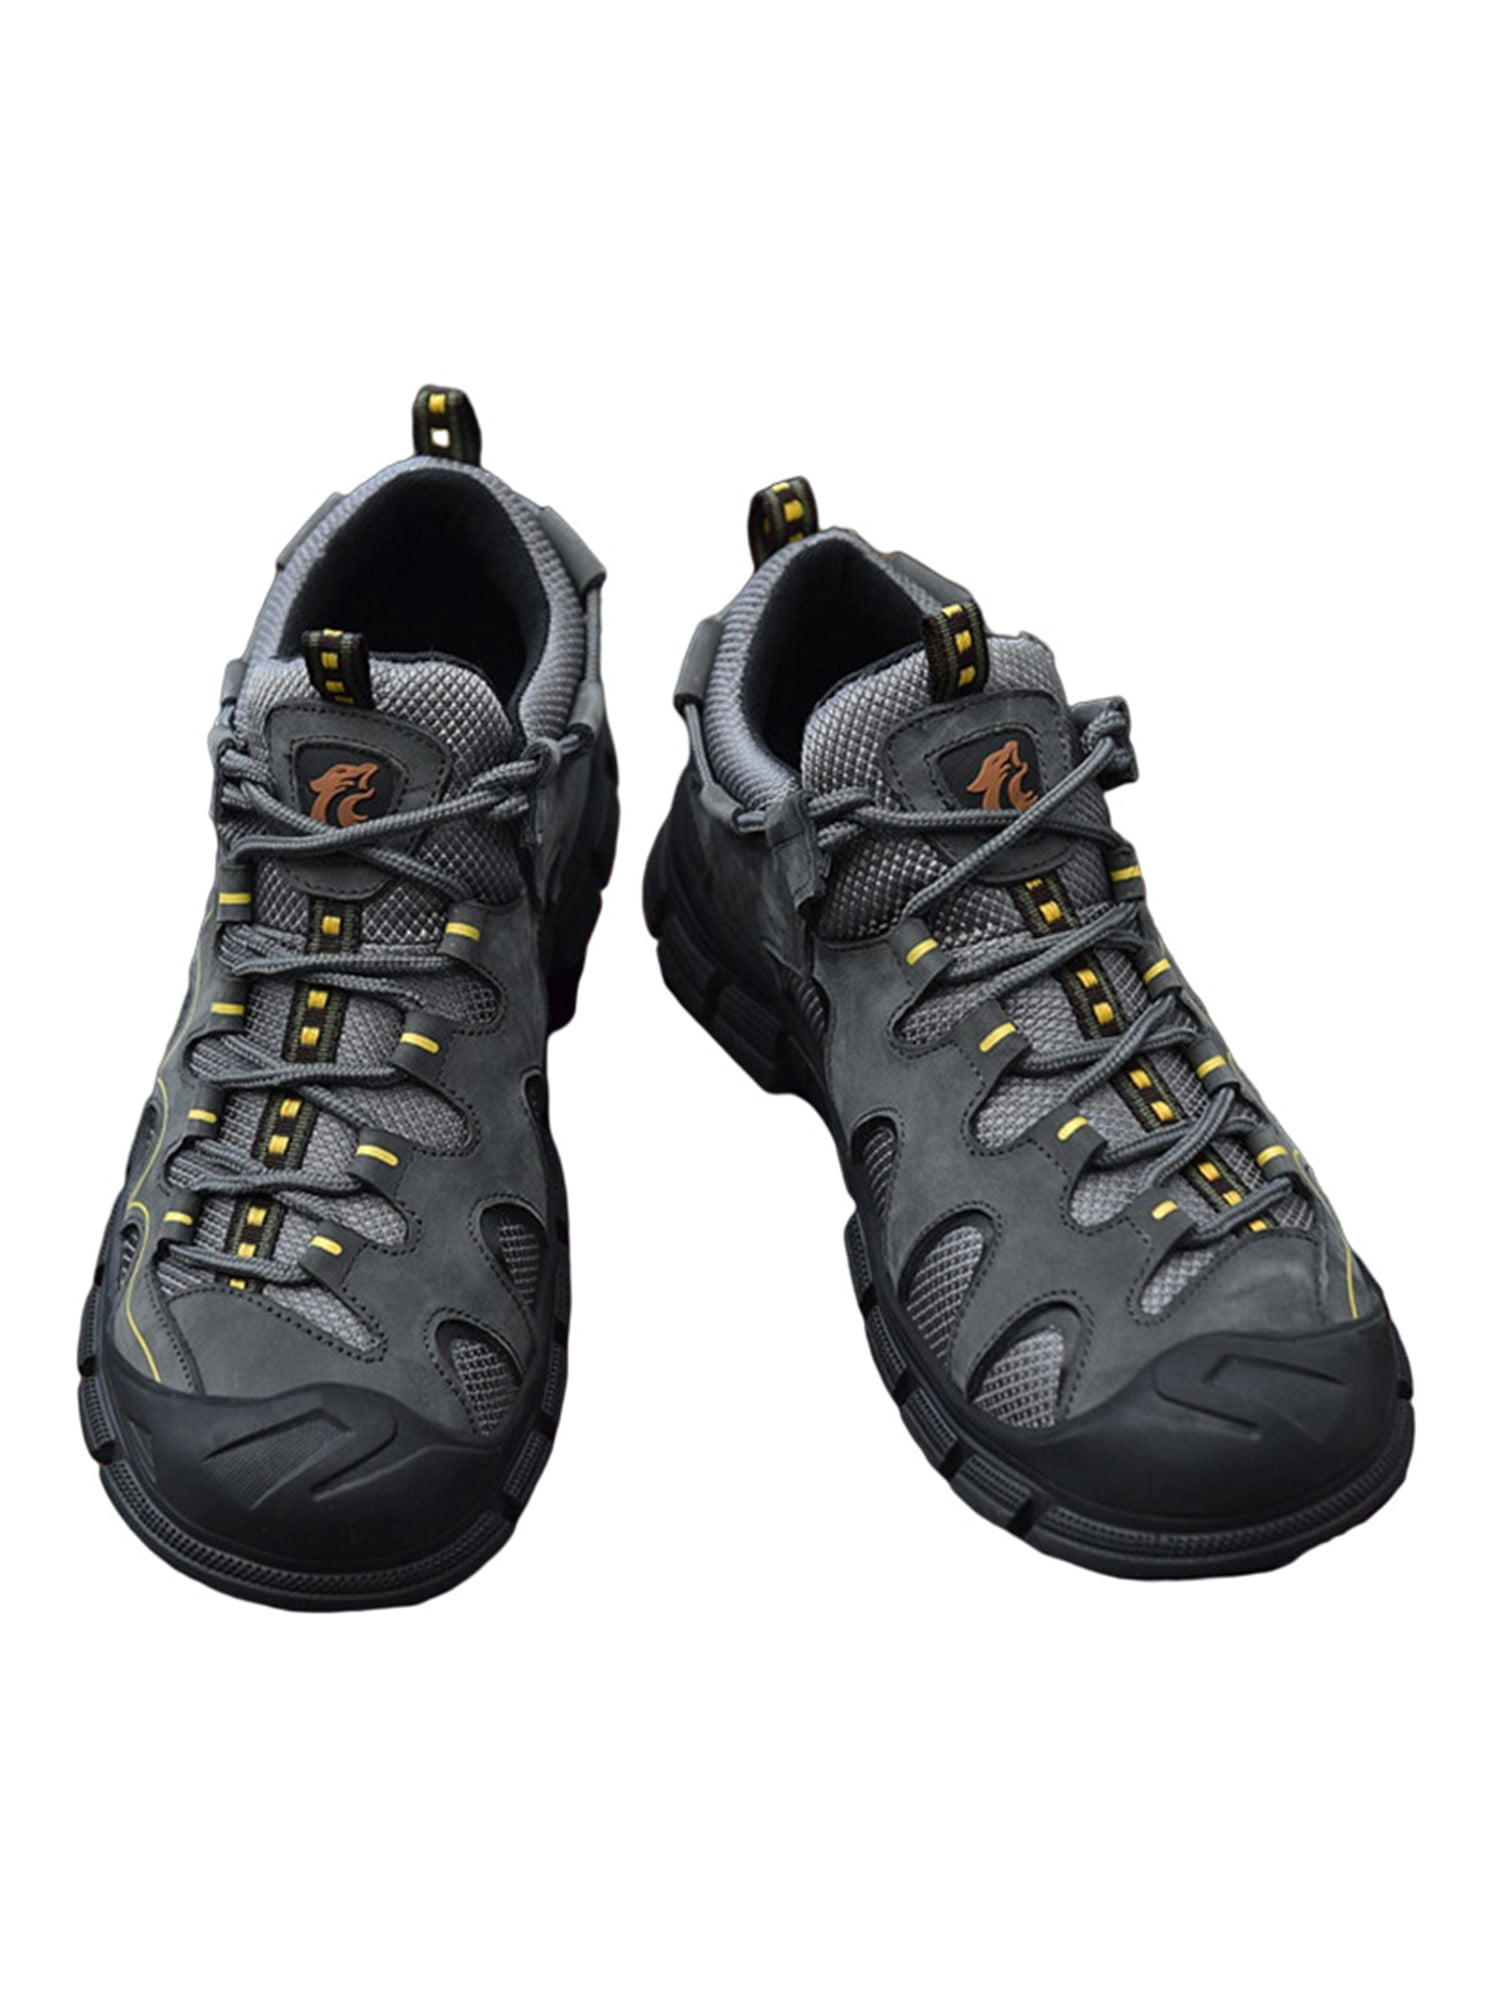 Details about   New Mesh Breathable Men's Shoes Sneakers Hiking Non-Slip Shoes Sneakers 